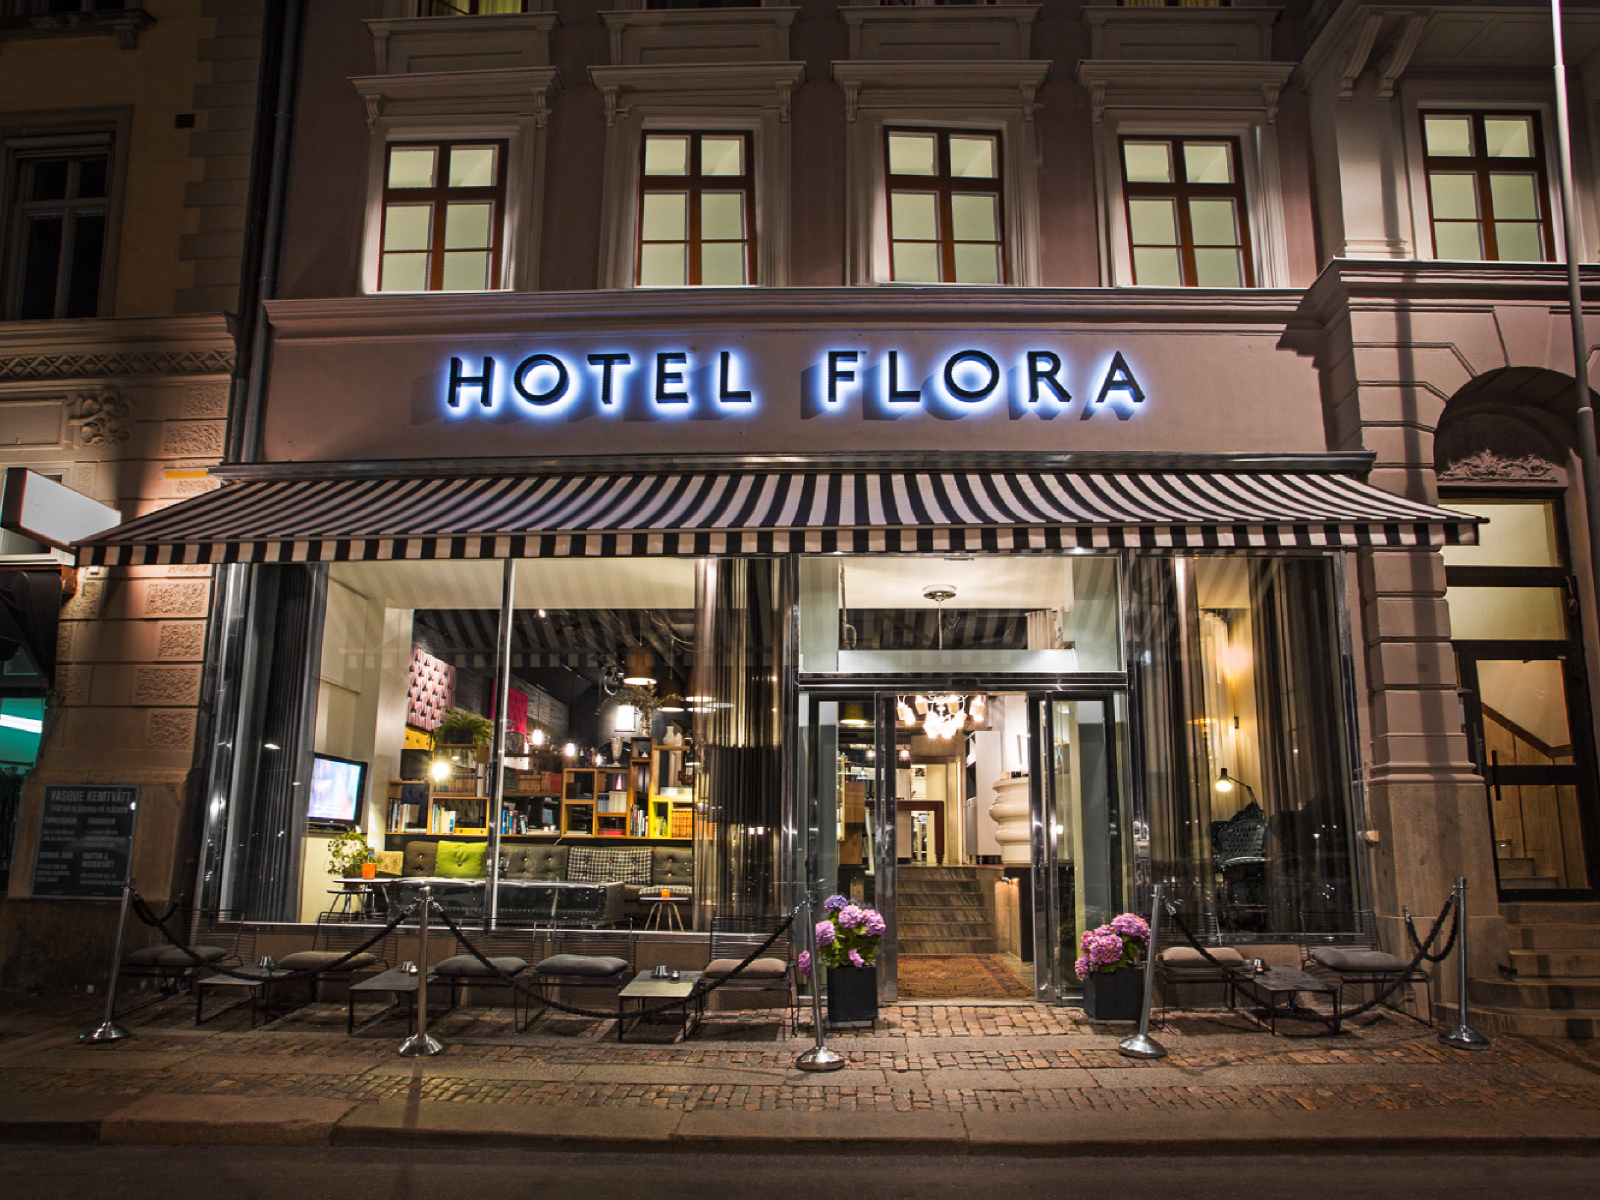 Hotel Flora <br/>75.62 ew <br/> <a href='http://vakantieoplossing.nl/outpage/?id=6cea0f9329f4b1631099dfb960b4b18a' target='_blank'>View Details</a>